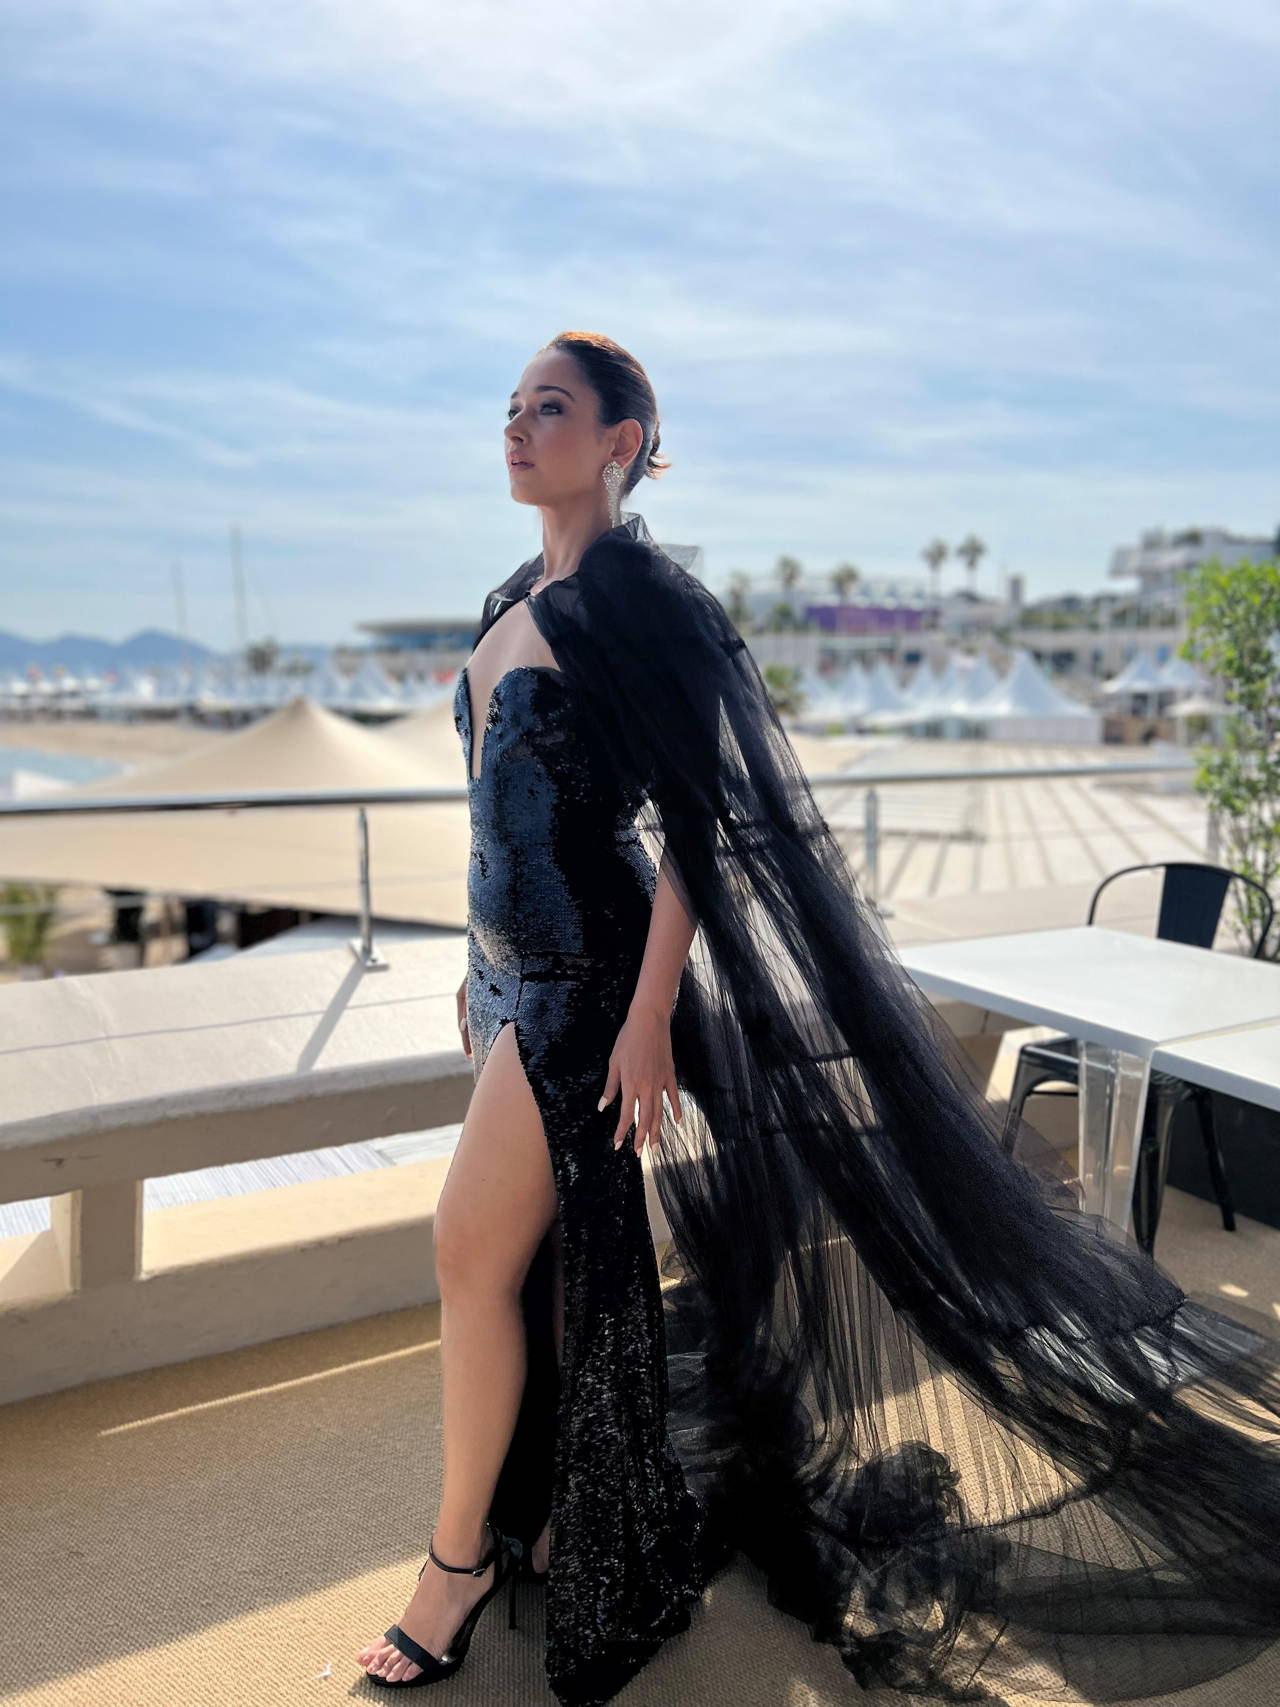 Tamannaah Bhatia makes her Red-Carpet Debut at Cannes Film Festival this year with Diageo India.